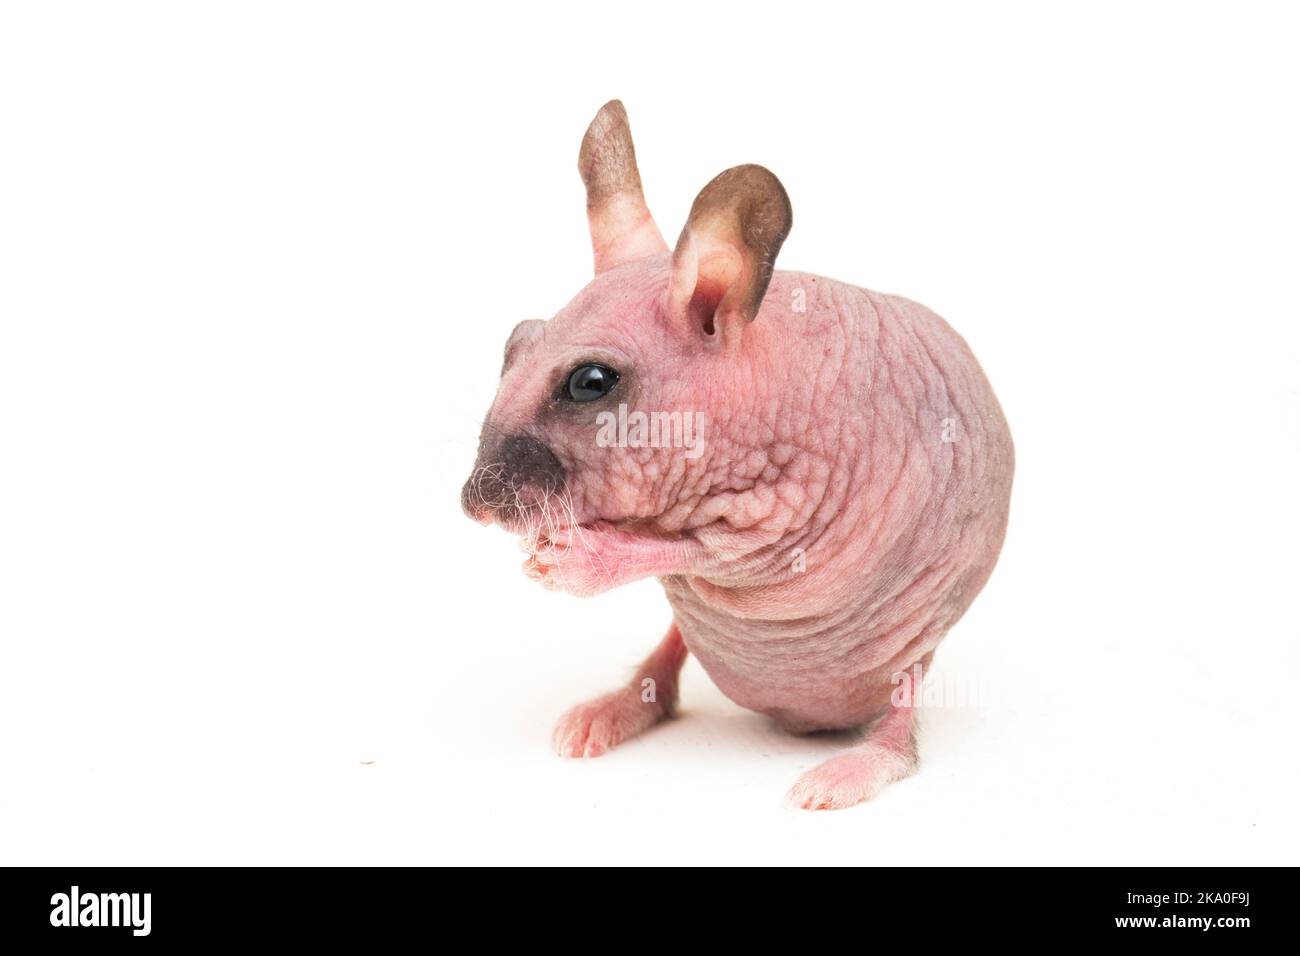 Cute dwarf Hairless hamster isolated on white background Stock Photo